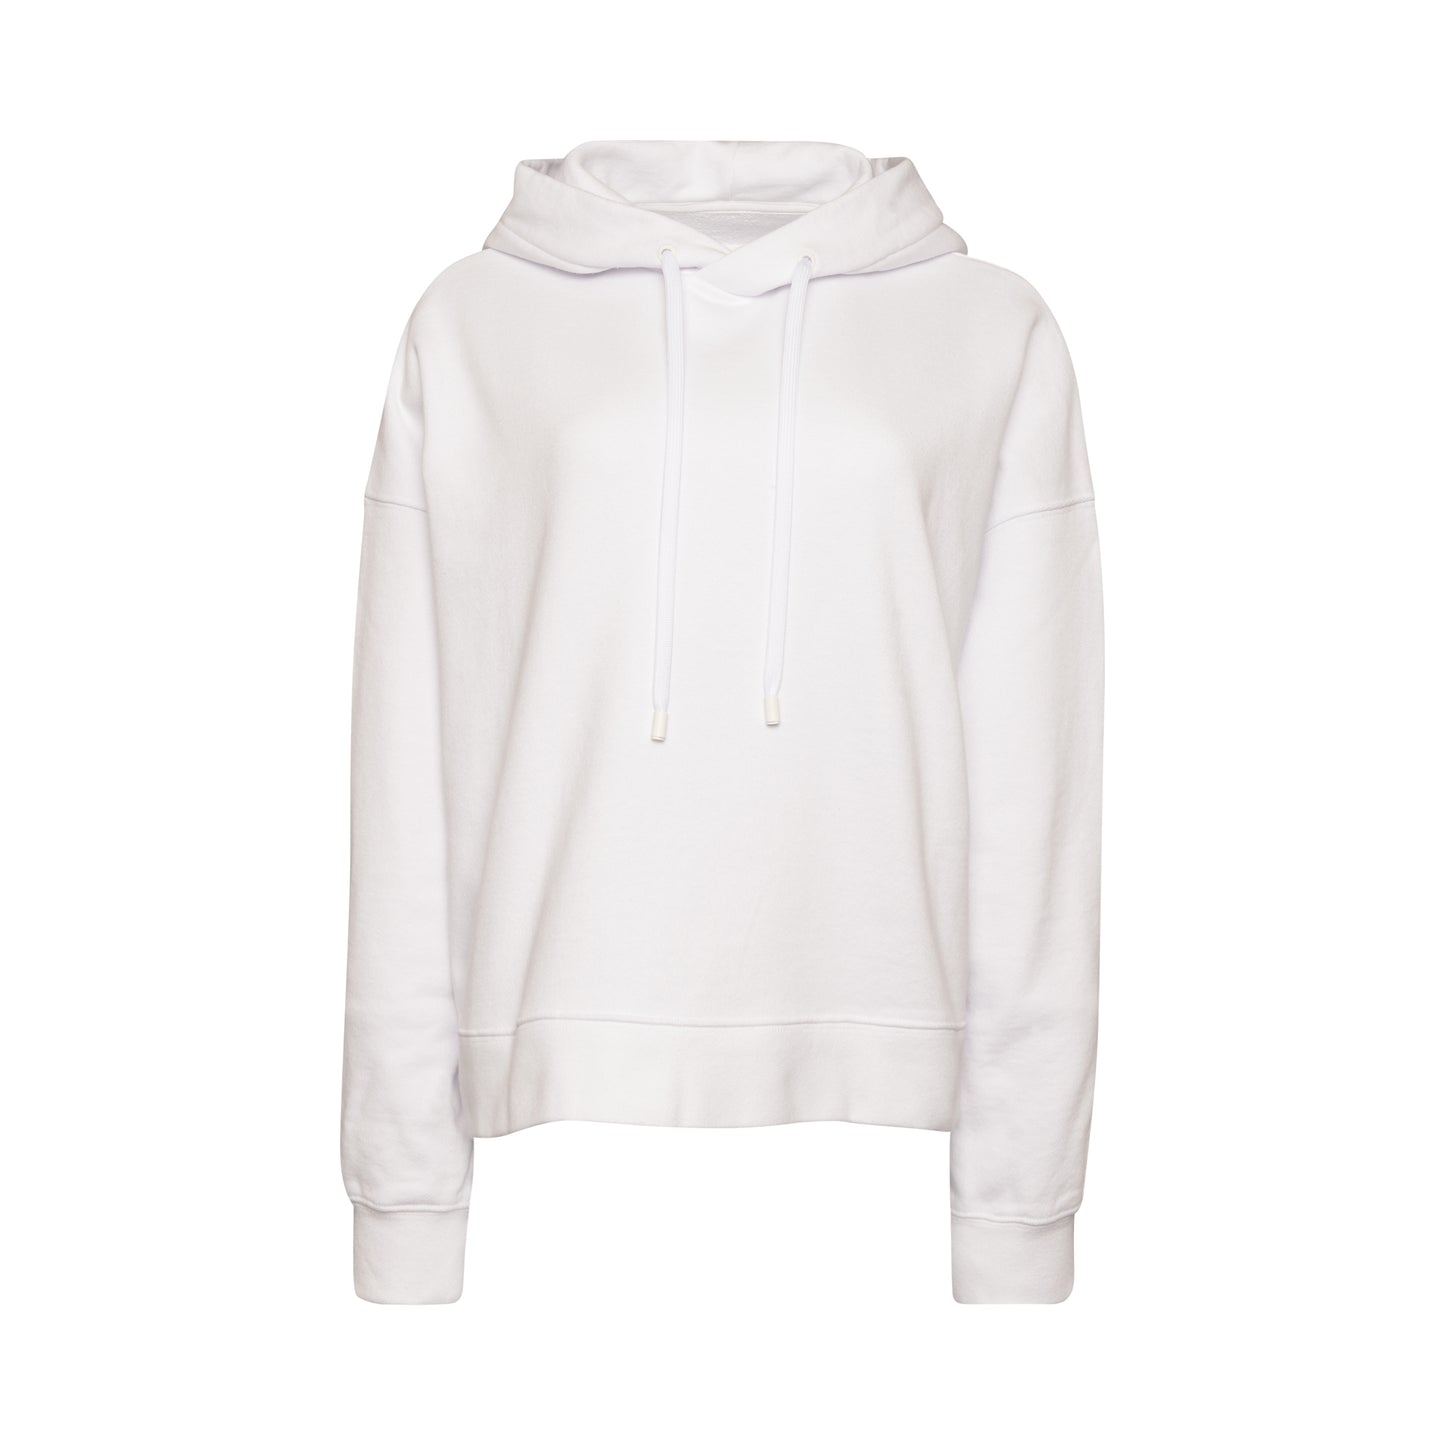 Aids Charity Hoodie in White